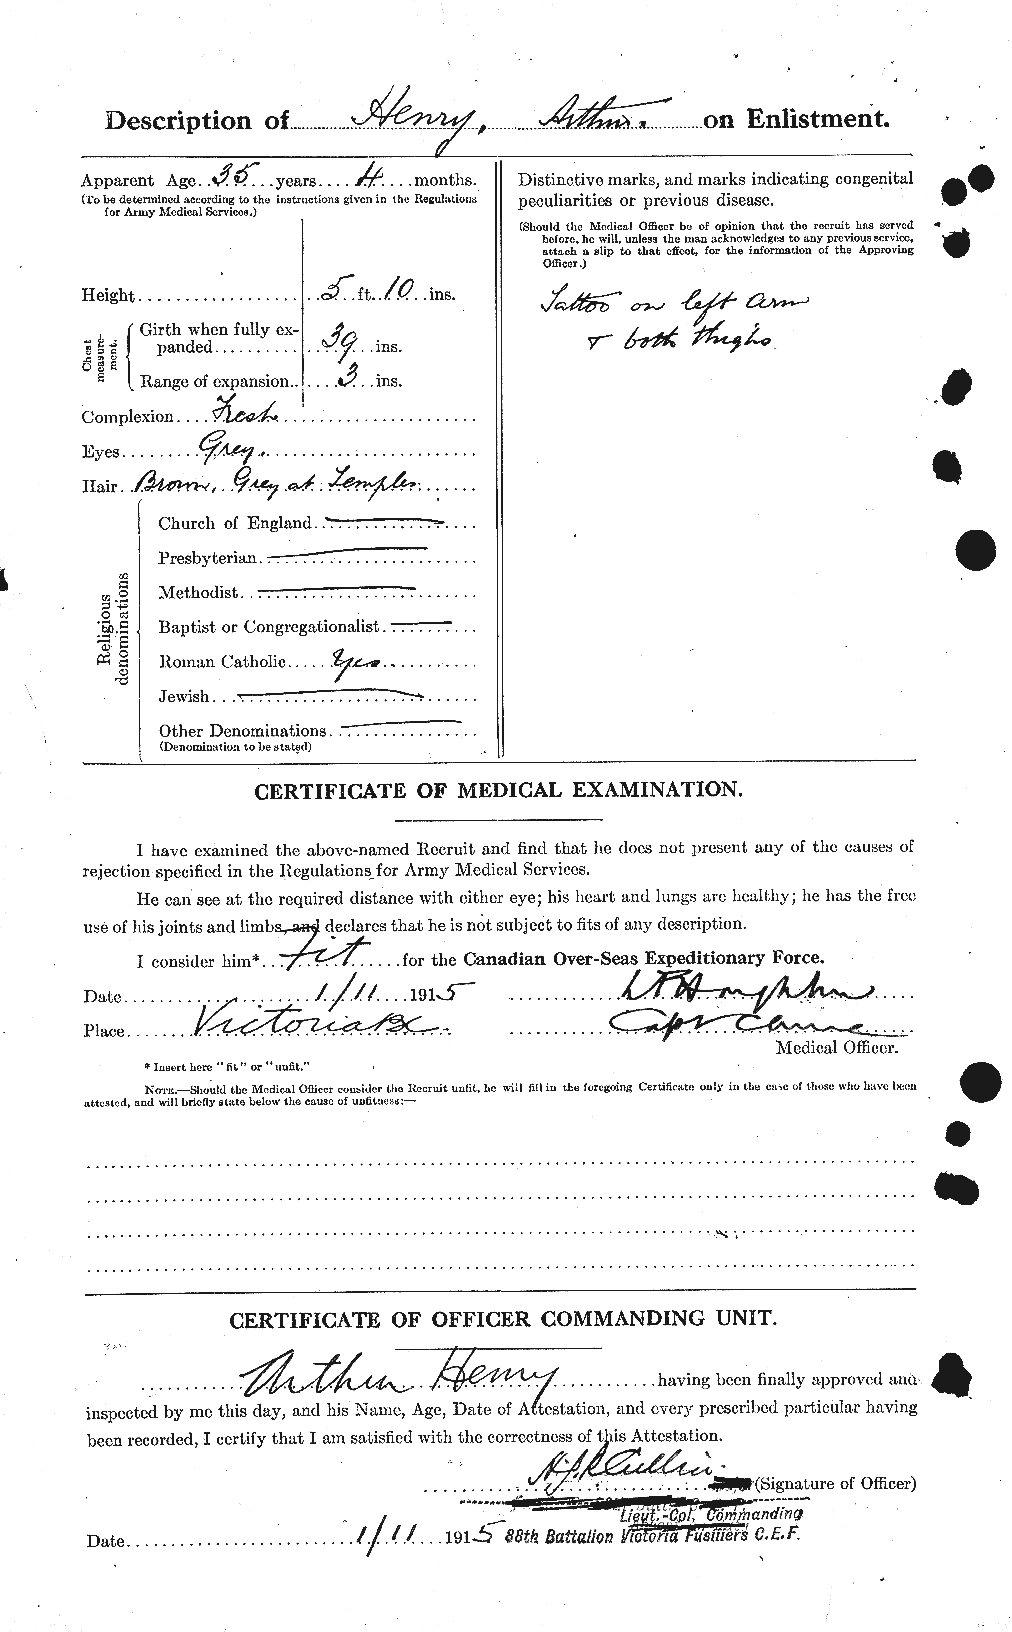 Personnel Records of the First World War - CEF 392782b